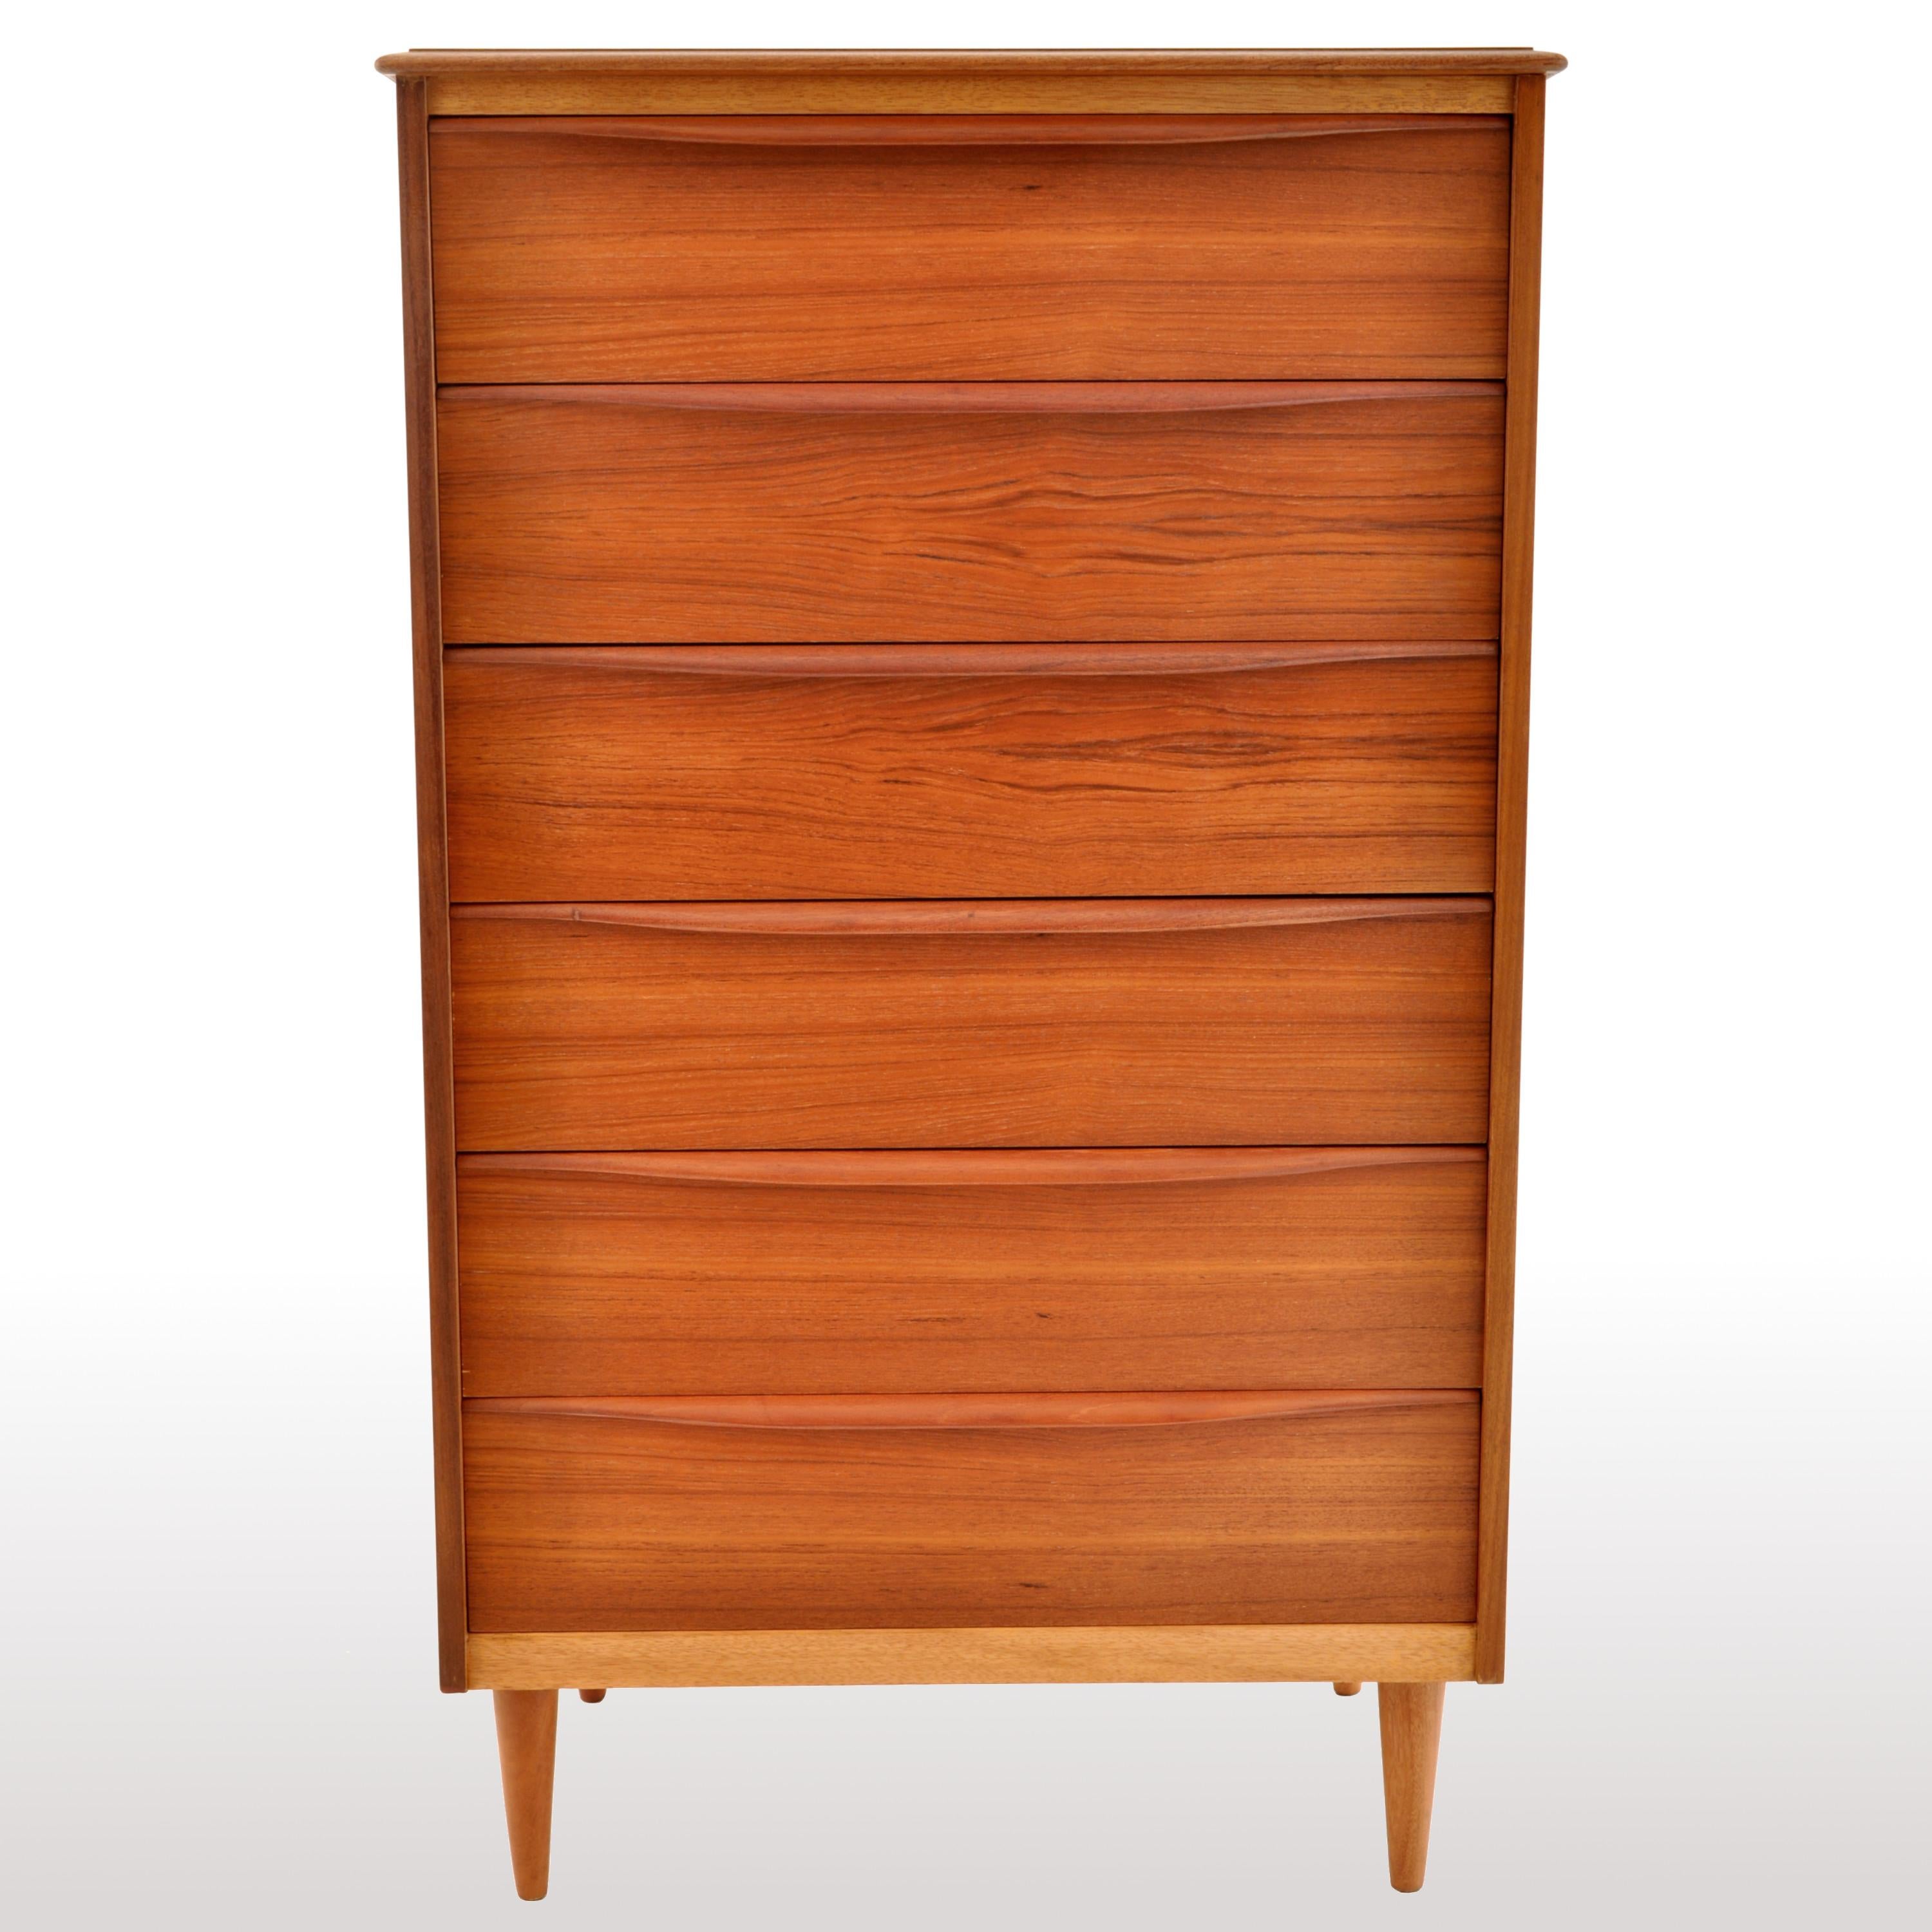 The dresser having six drawers with turned, elongated pulls and raised on round, tapering legs.